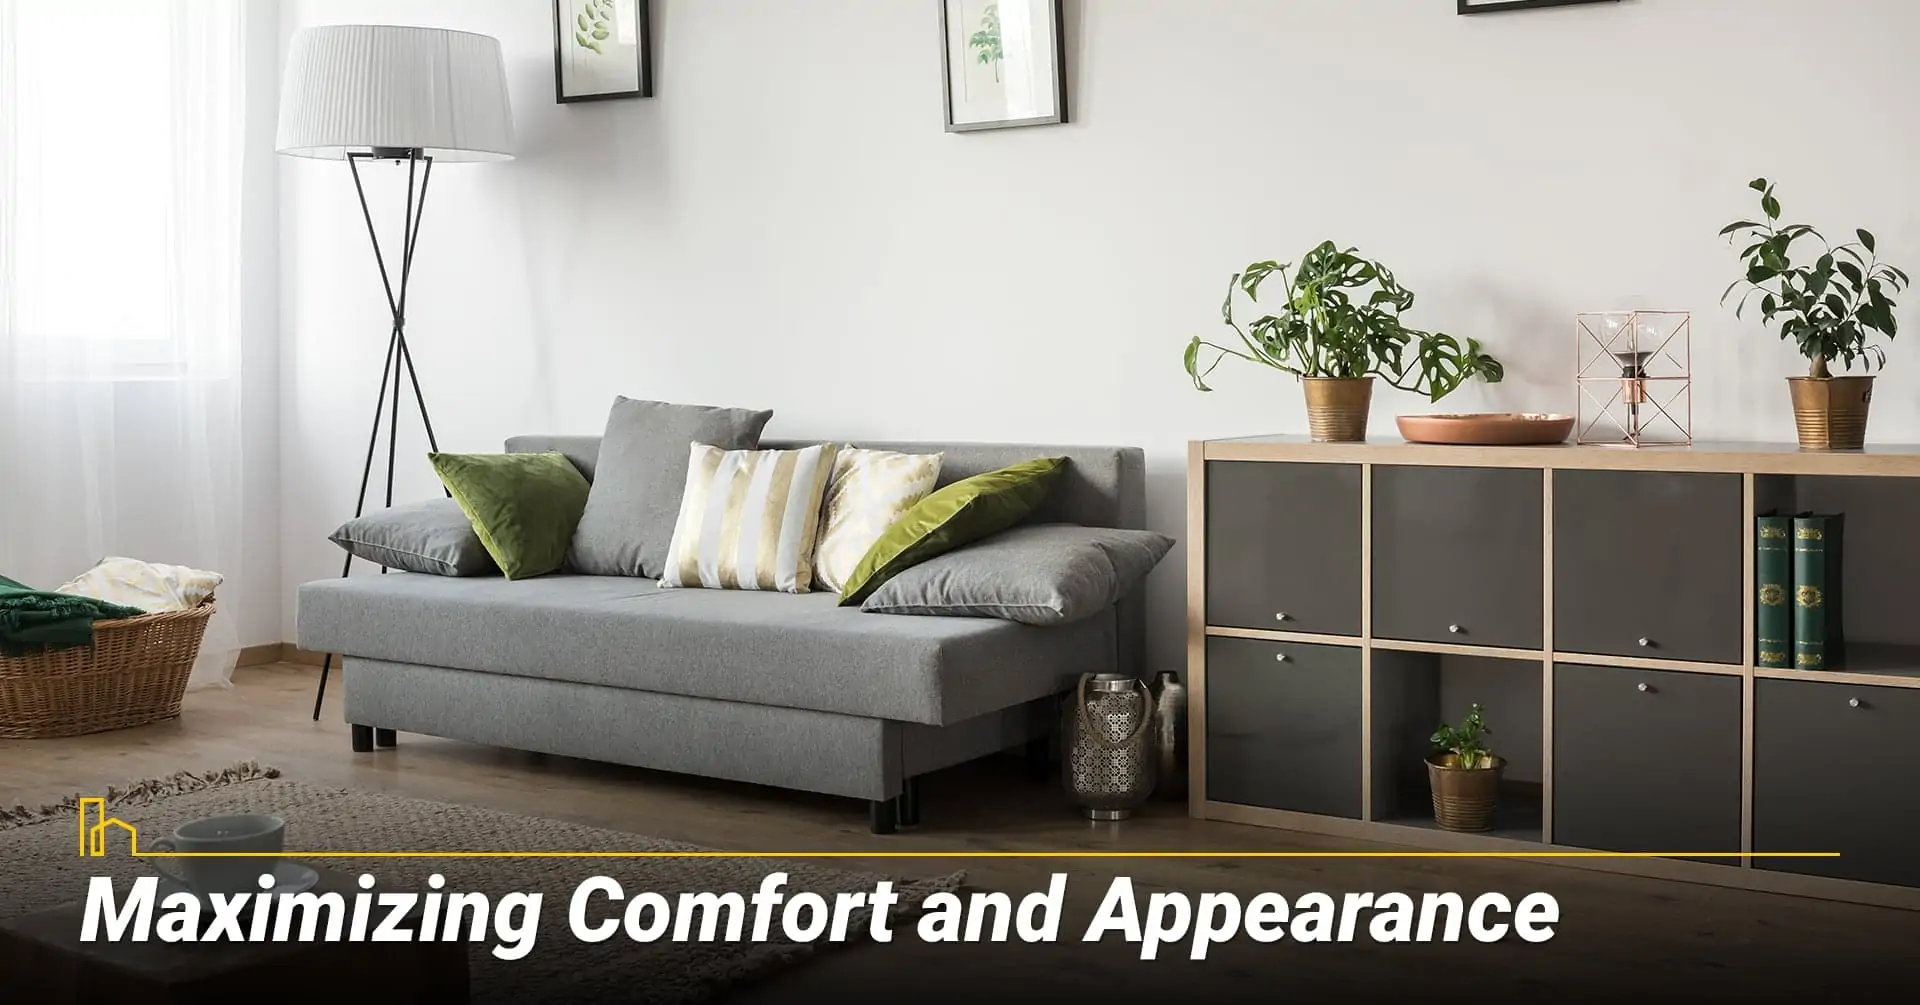 Maximizing Comfort and Appearance, design for beauty and comfort